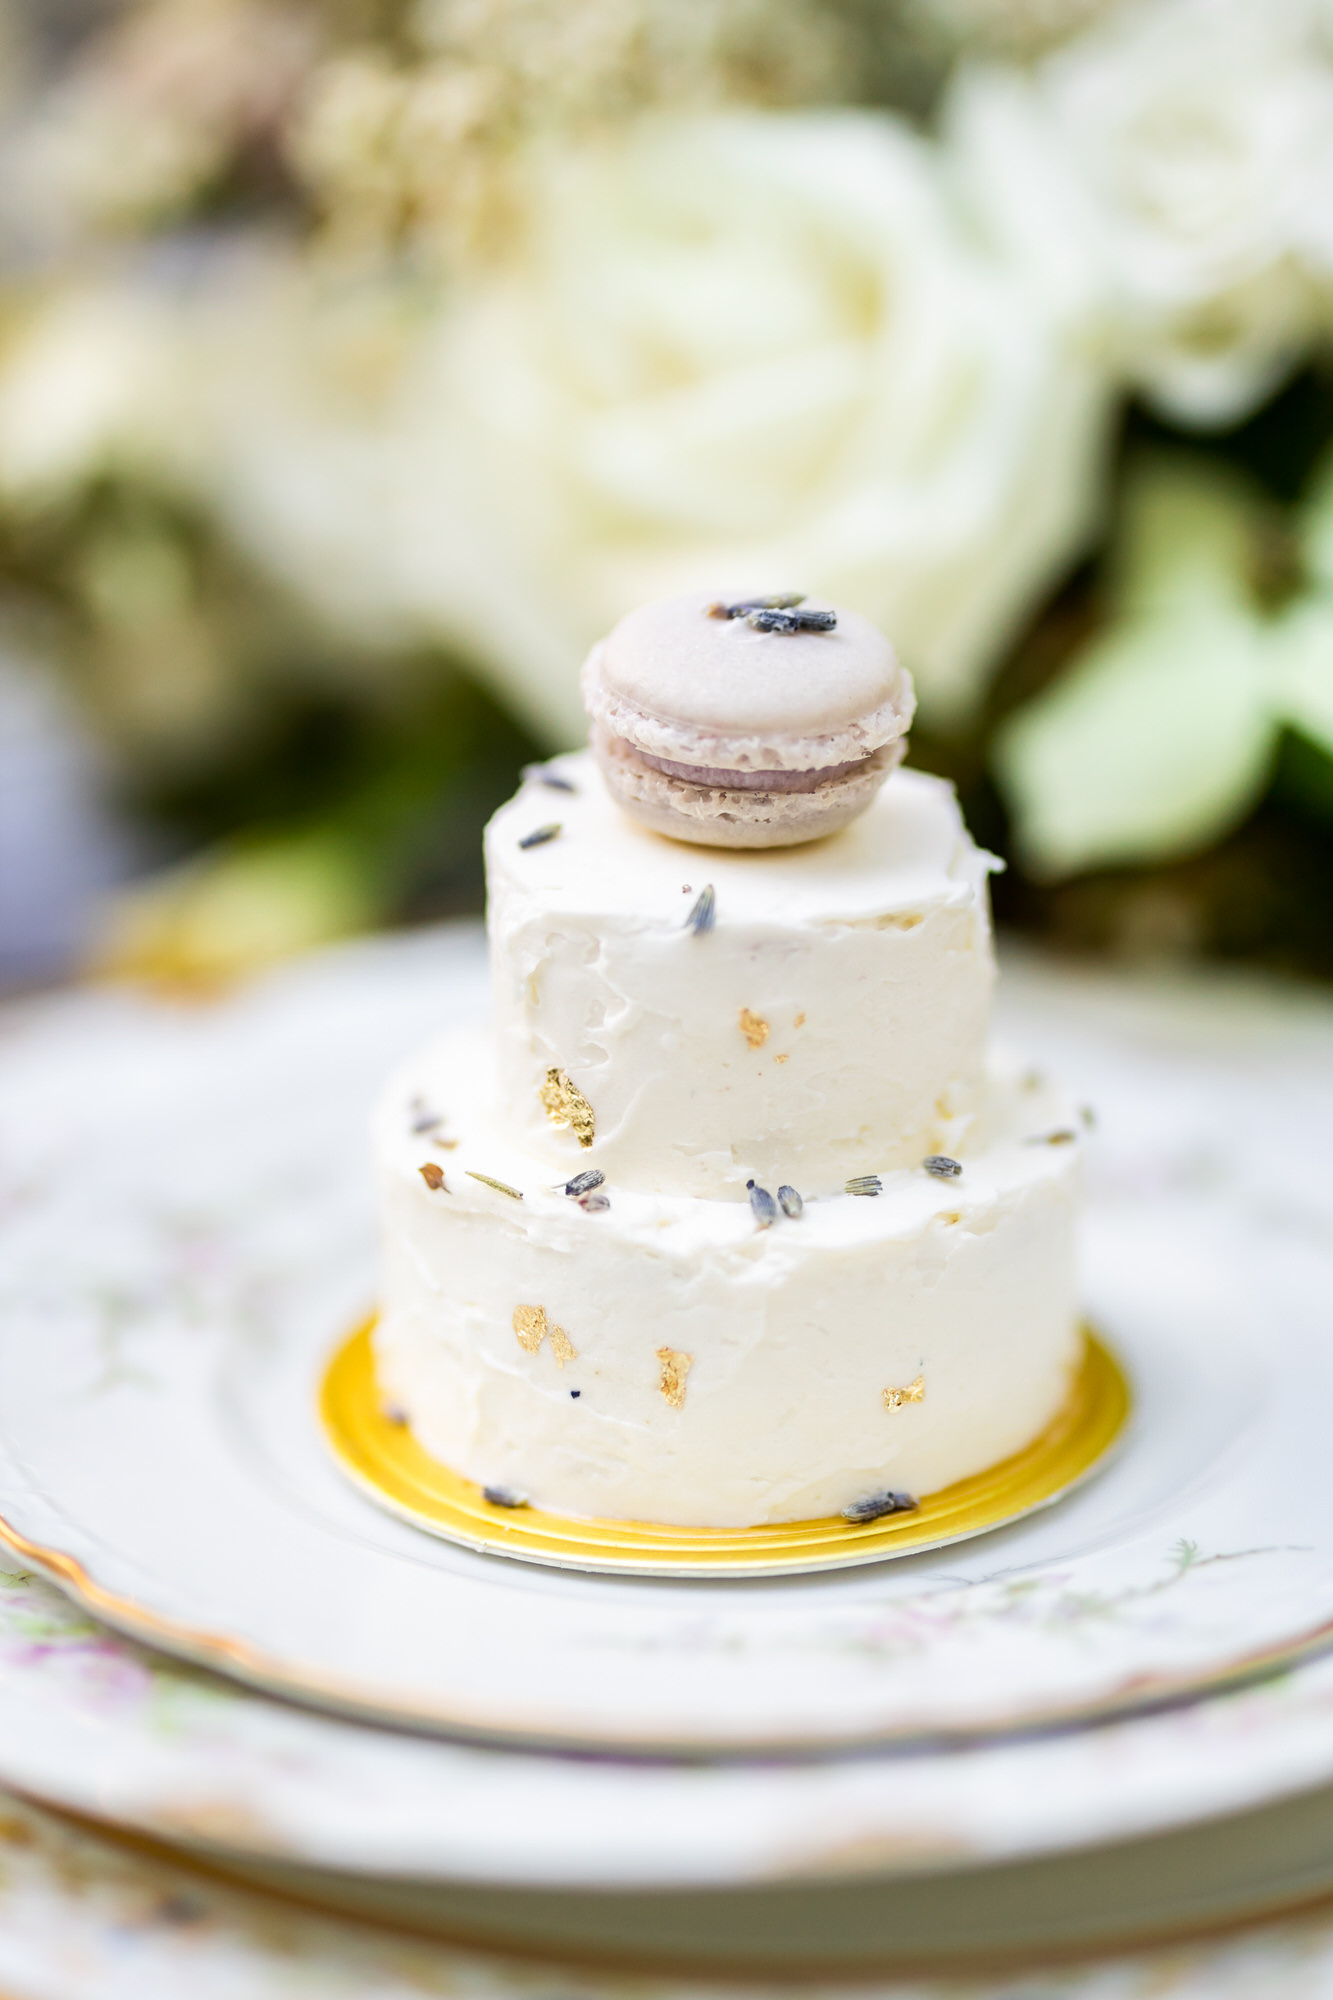 tiny cakes for wedding dessert with macaron sitting on top